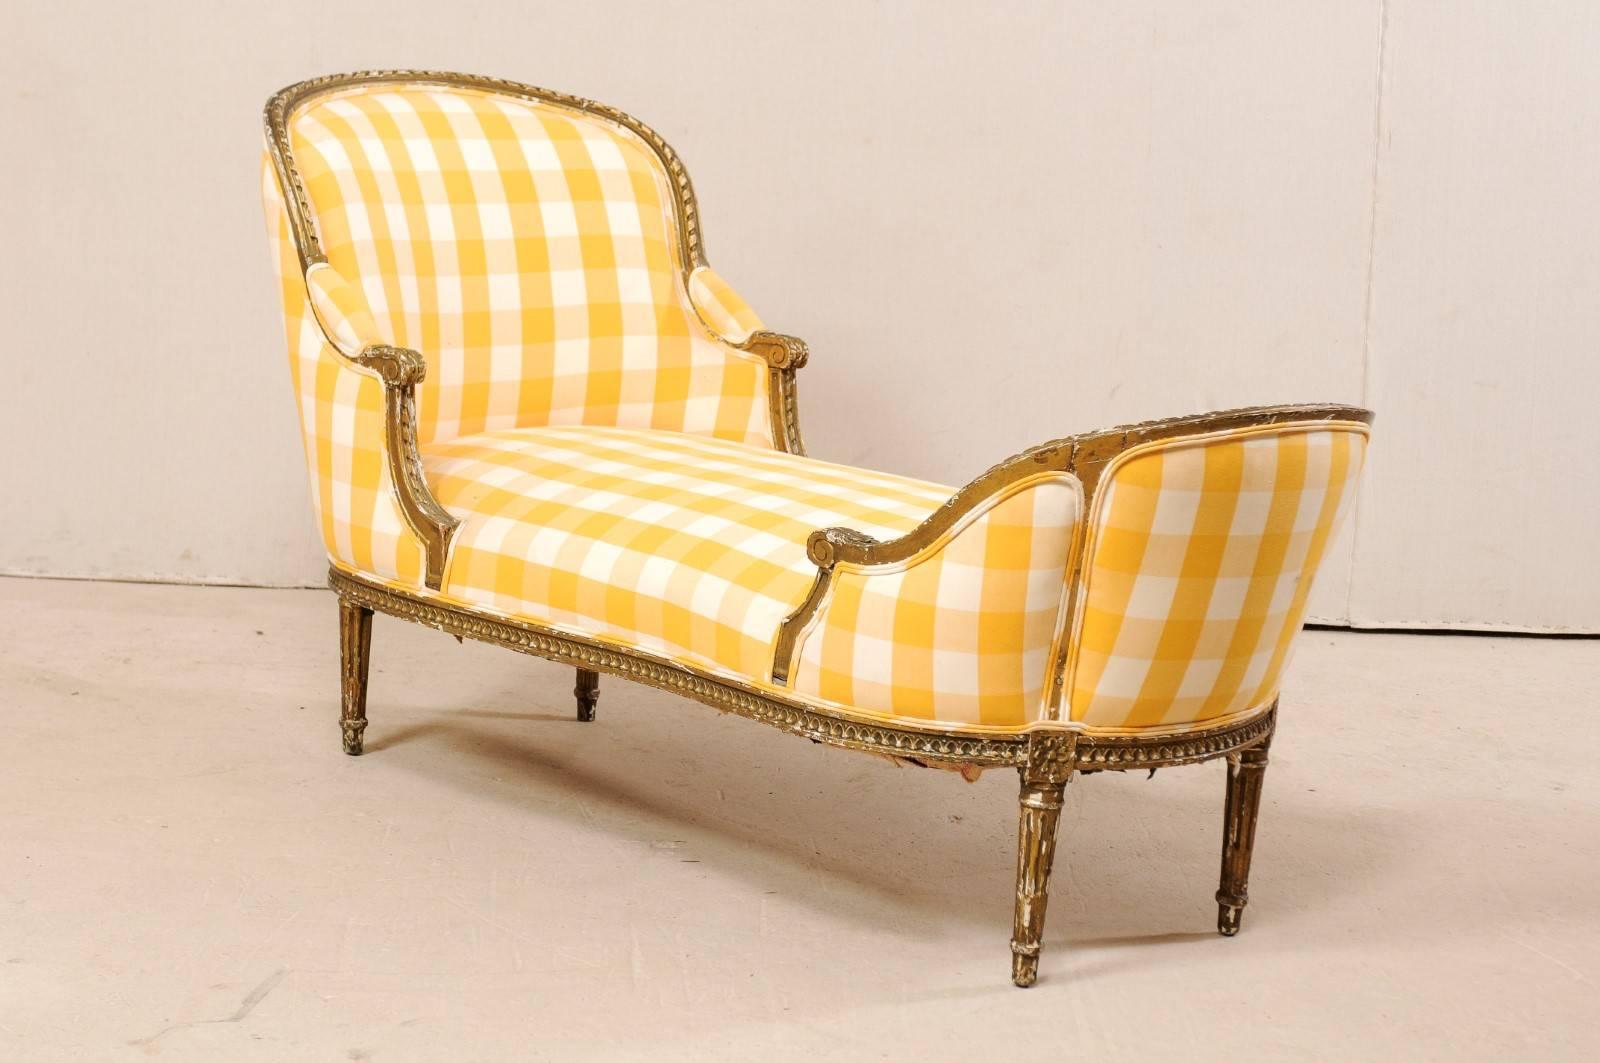 A French Louis XVI style chaise lounge from the turn of the 19th and 20th centuries. This antique Duchesse en Bateau (chaise) from France, in the Louis XVI style, features ribbon and egg-and-dart molding, scrolled knuckles, and rosettes along the